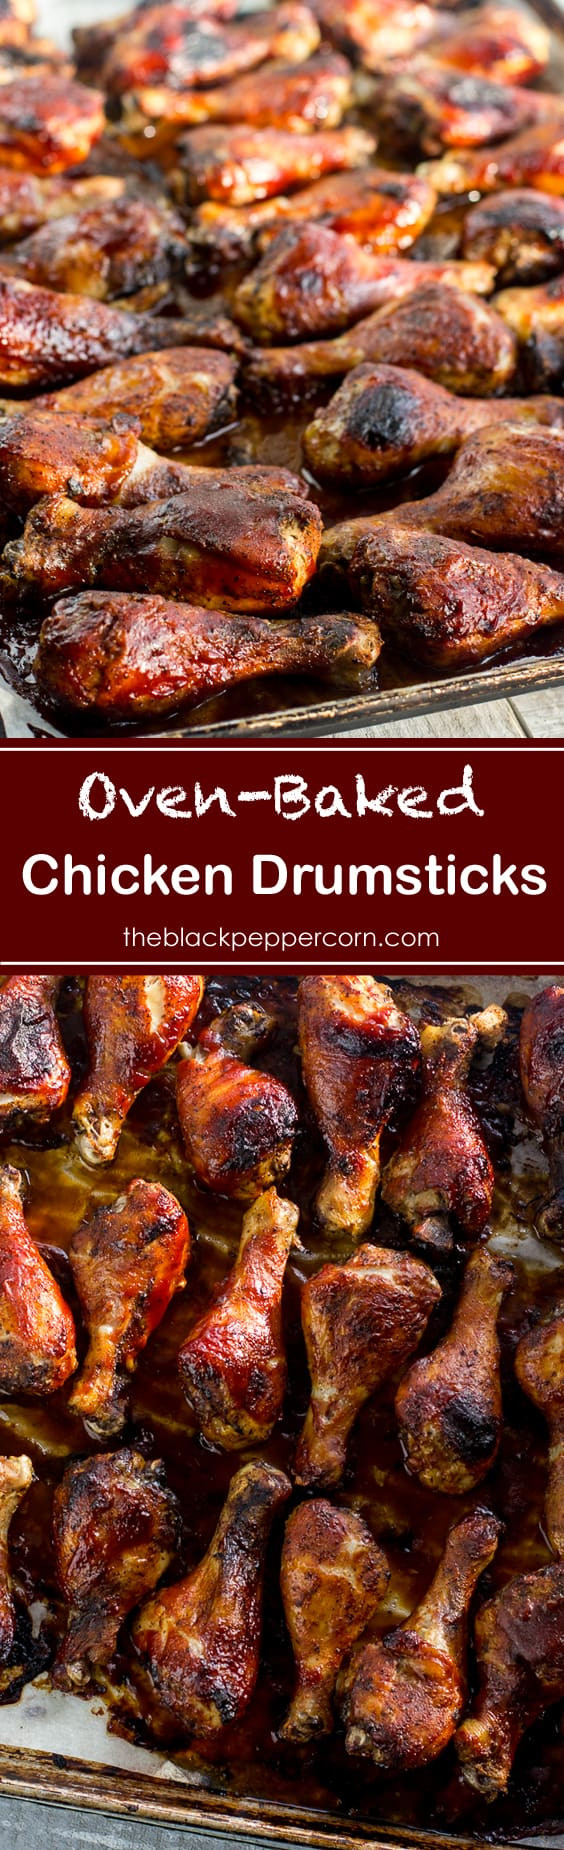 How Long To Cook Chicken Legs
 Baked Chicken Drumsticks How to bake in the oven